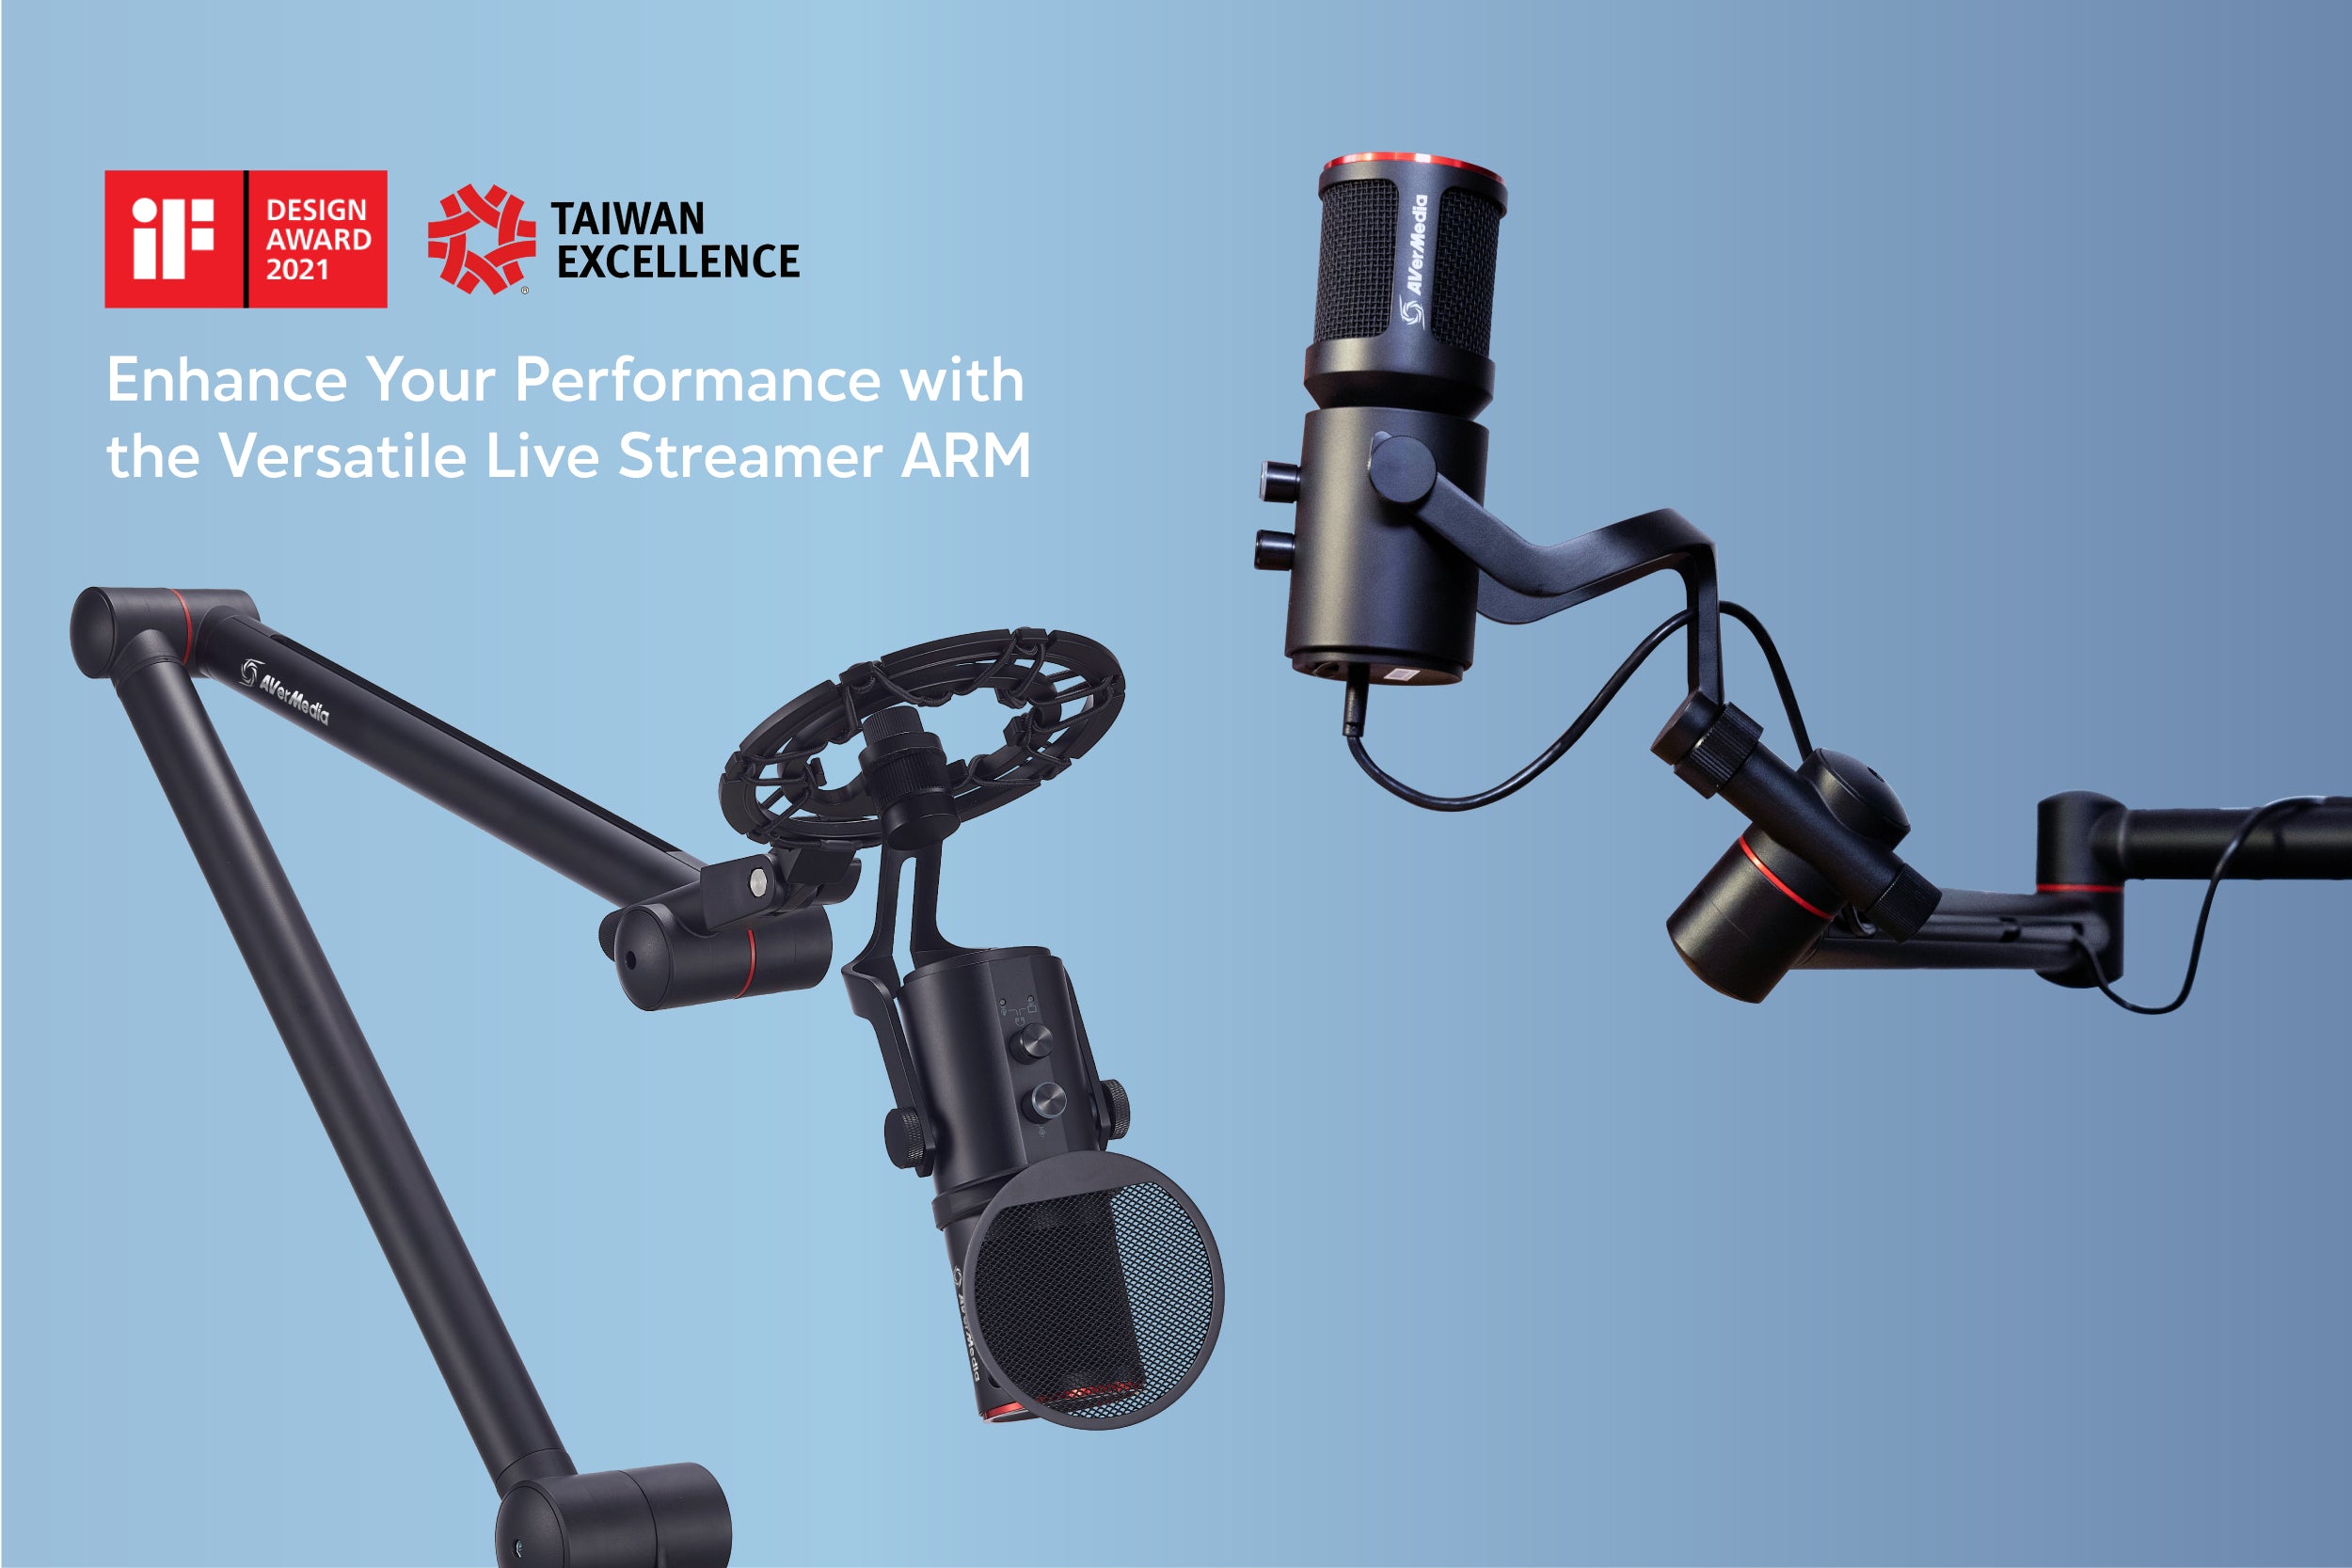 Limited Edition] AVerMedia AM350 Live Streamer Microphone Kit